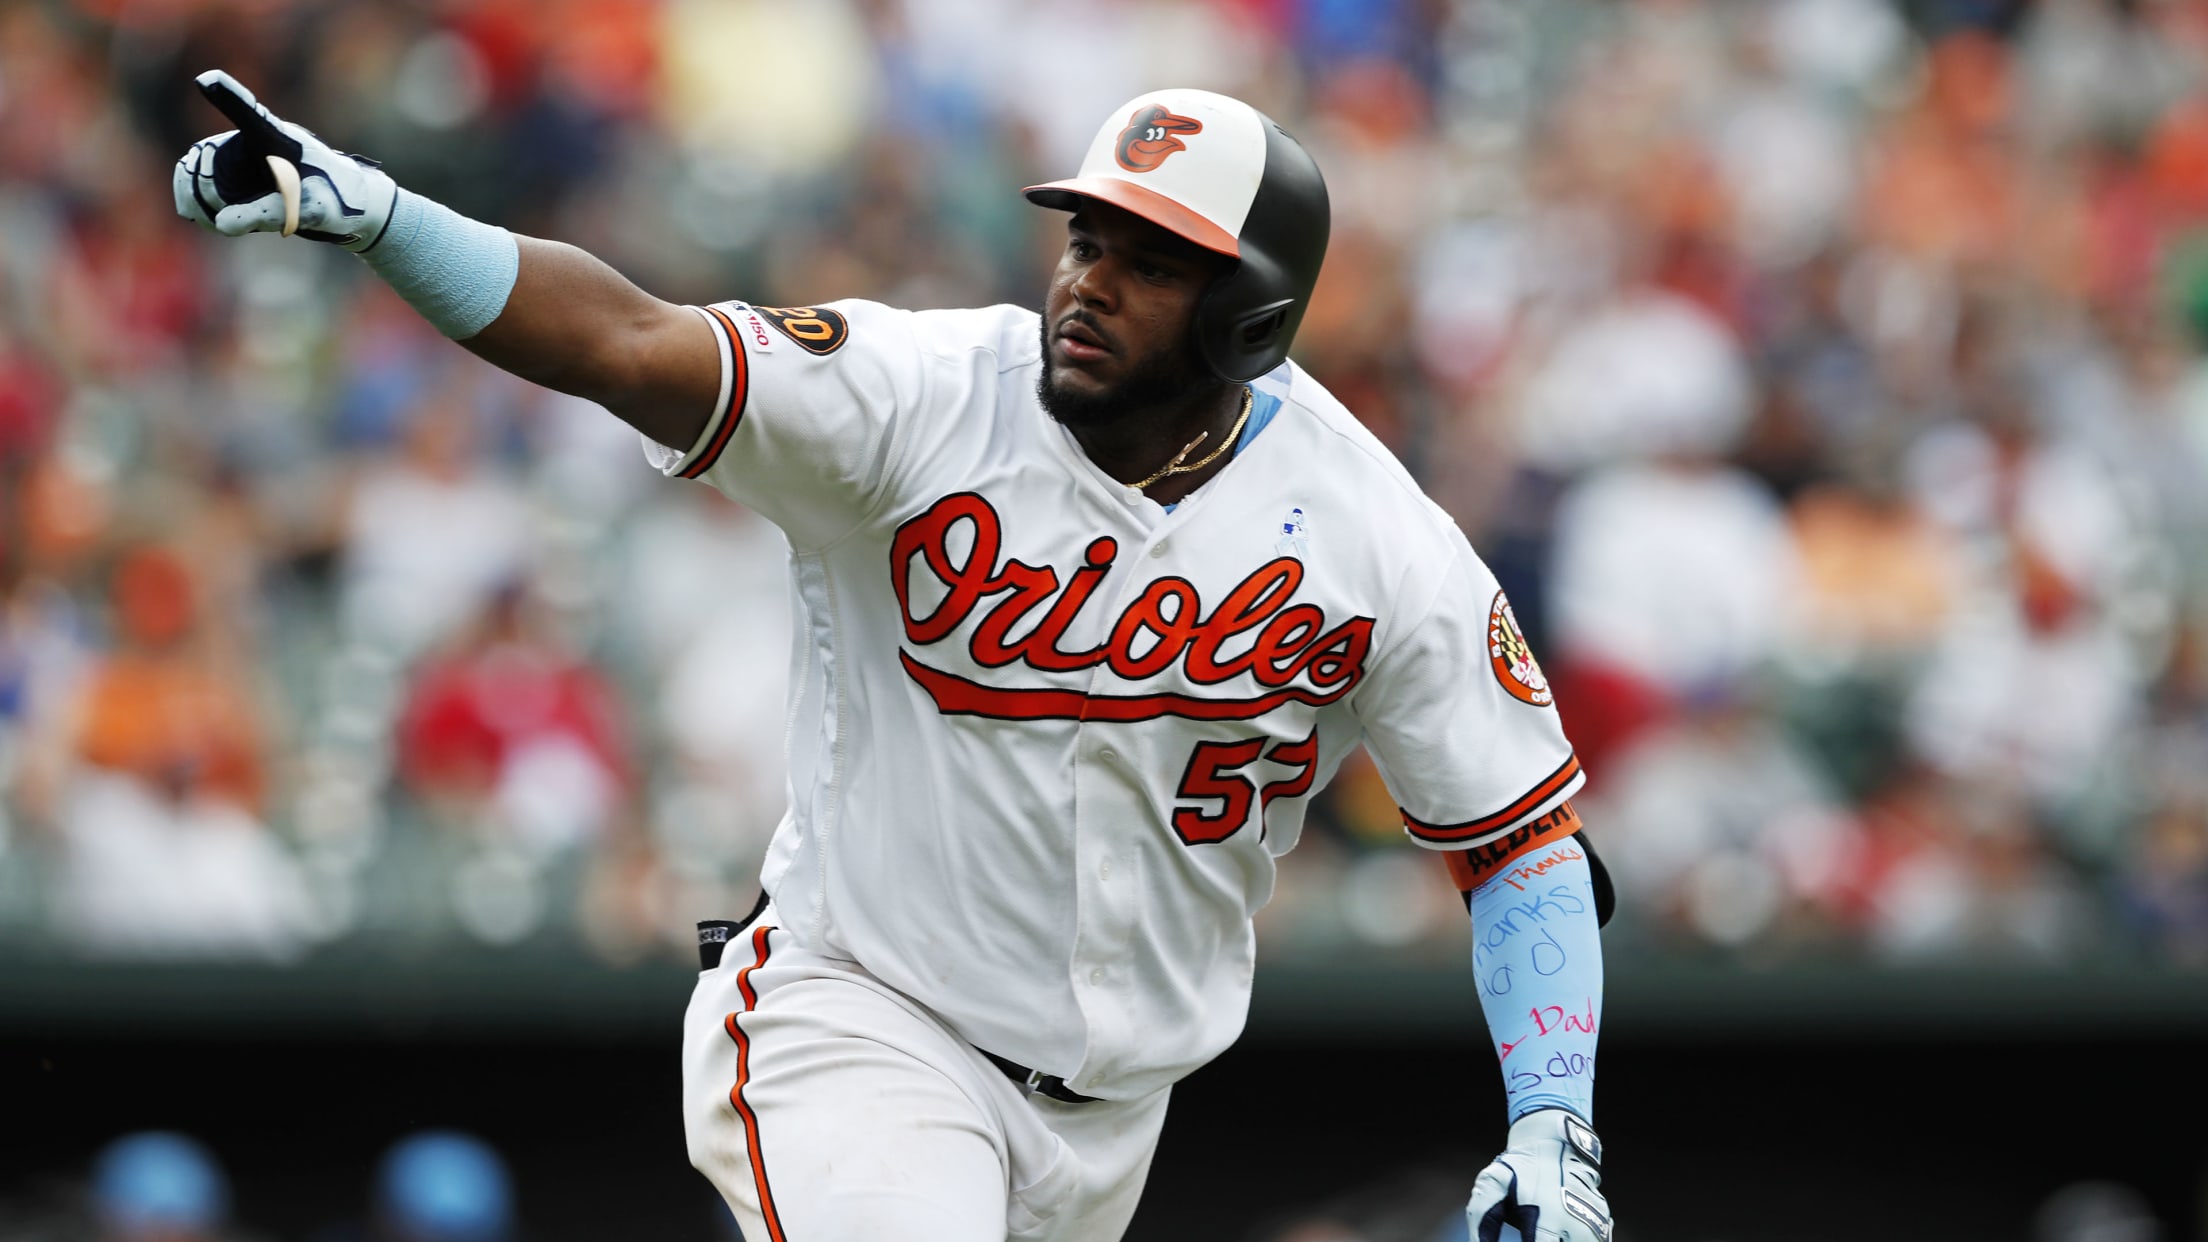 I've] been looking forward to - Baltimore Orioles